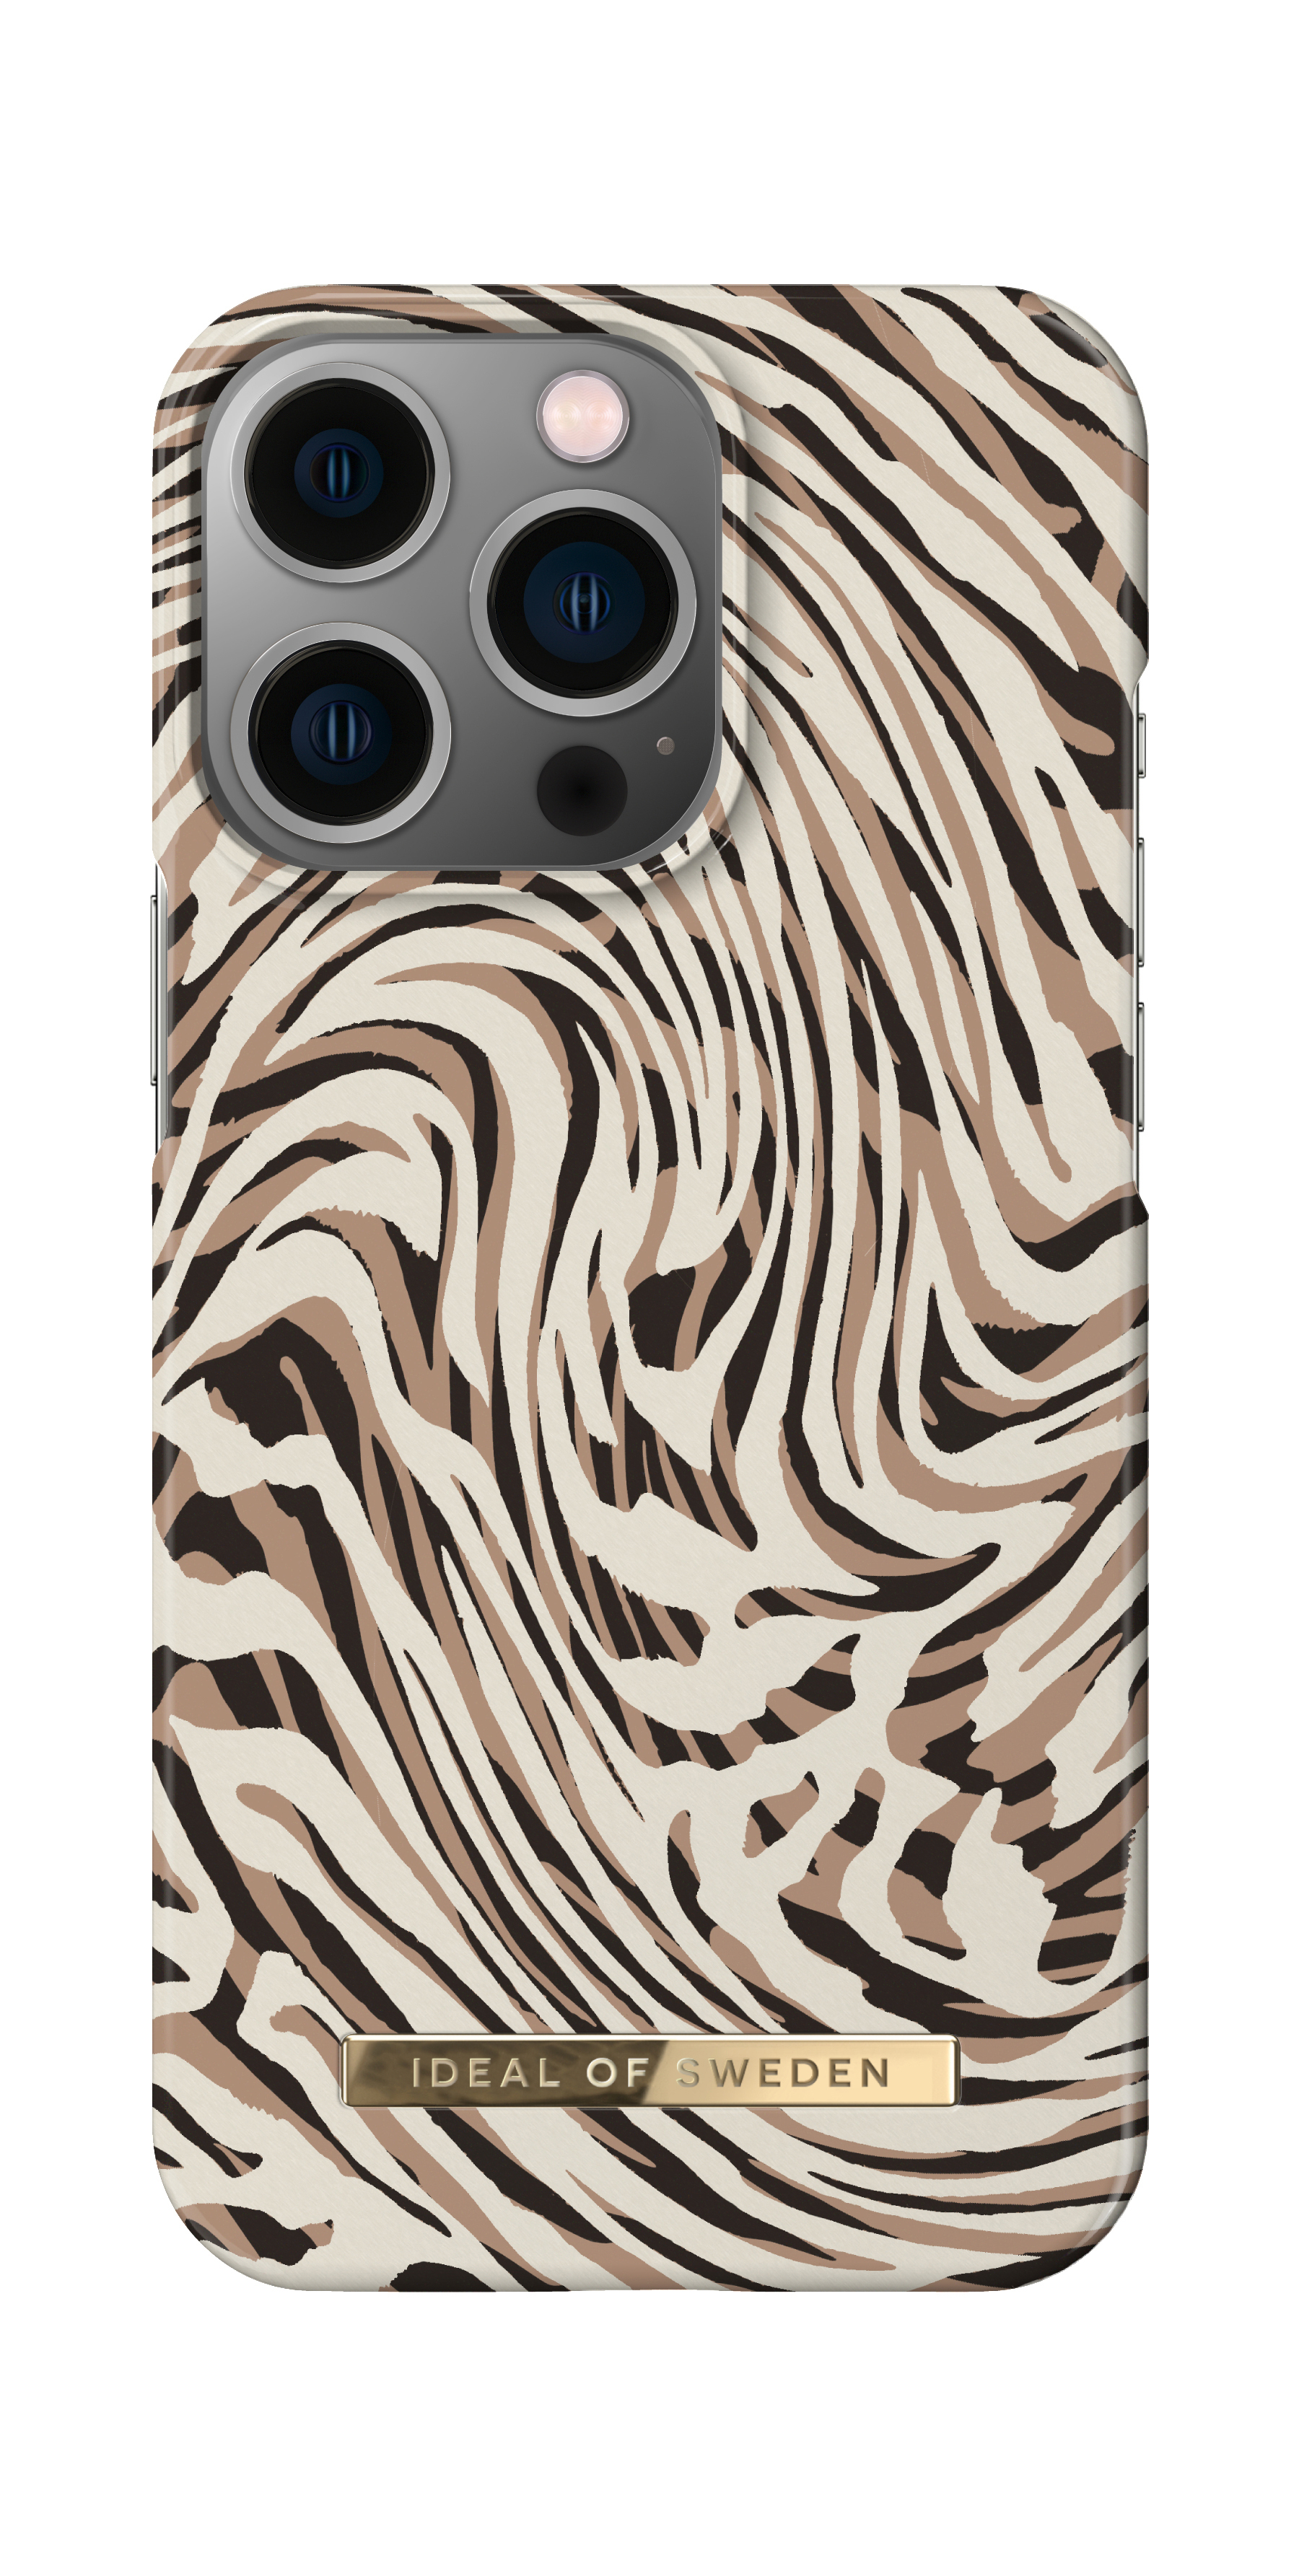 Zebra SWEDEN Backcover, iPhone OF IDEAL IDFCSS22-I2161P-392, Hypnotic Apple, 13Pro,